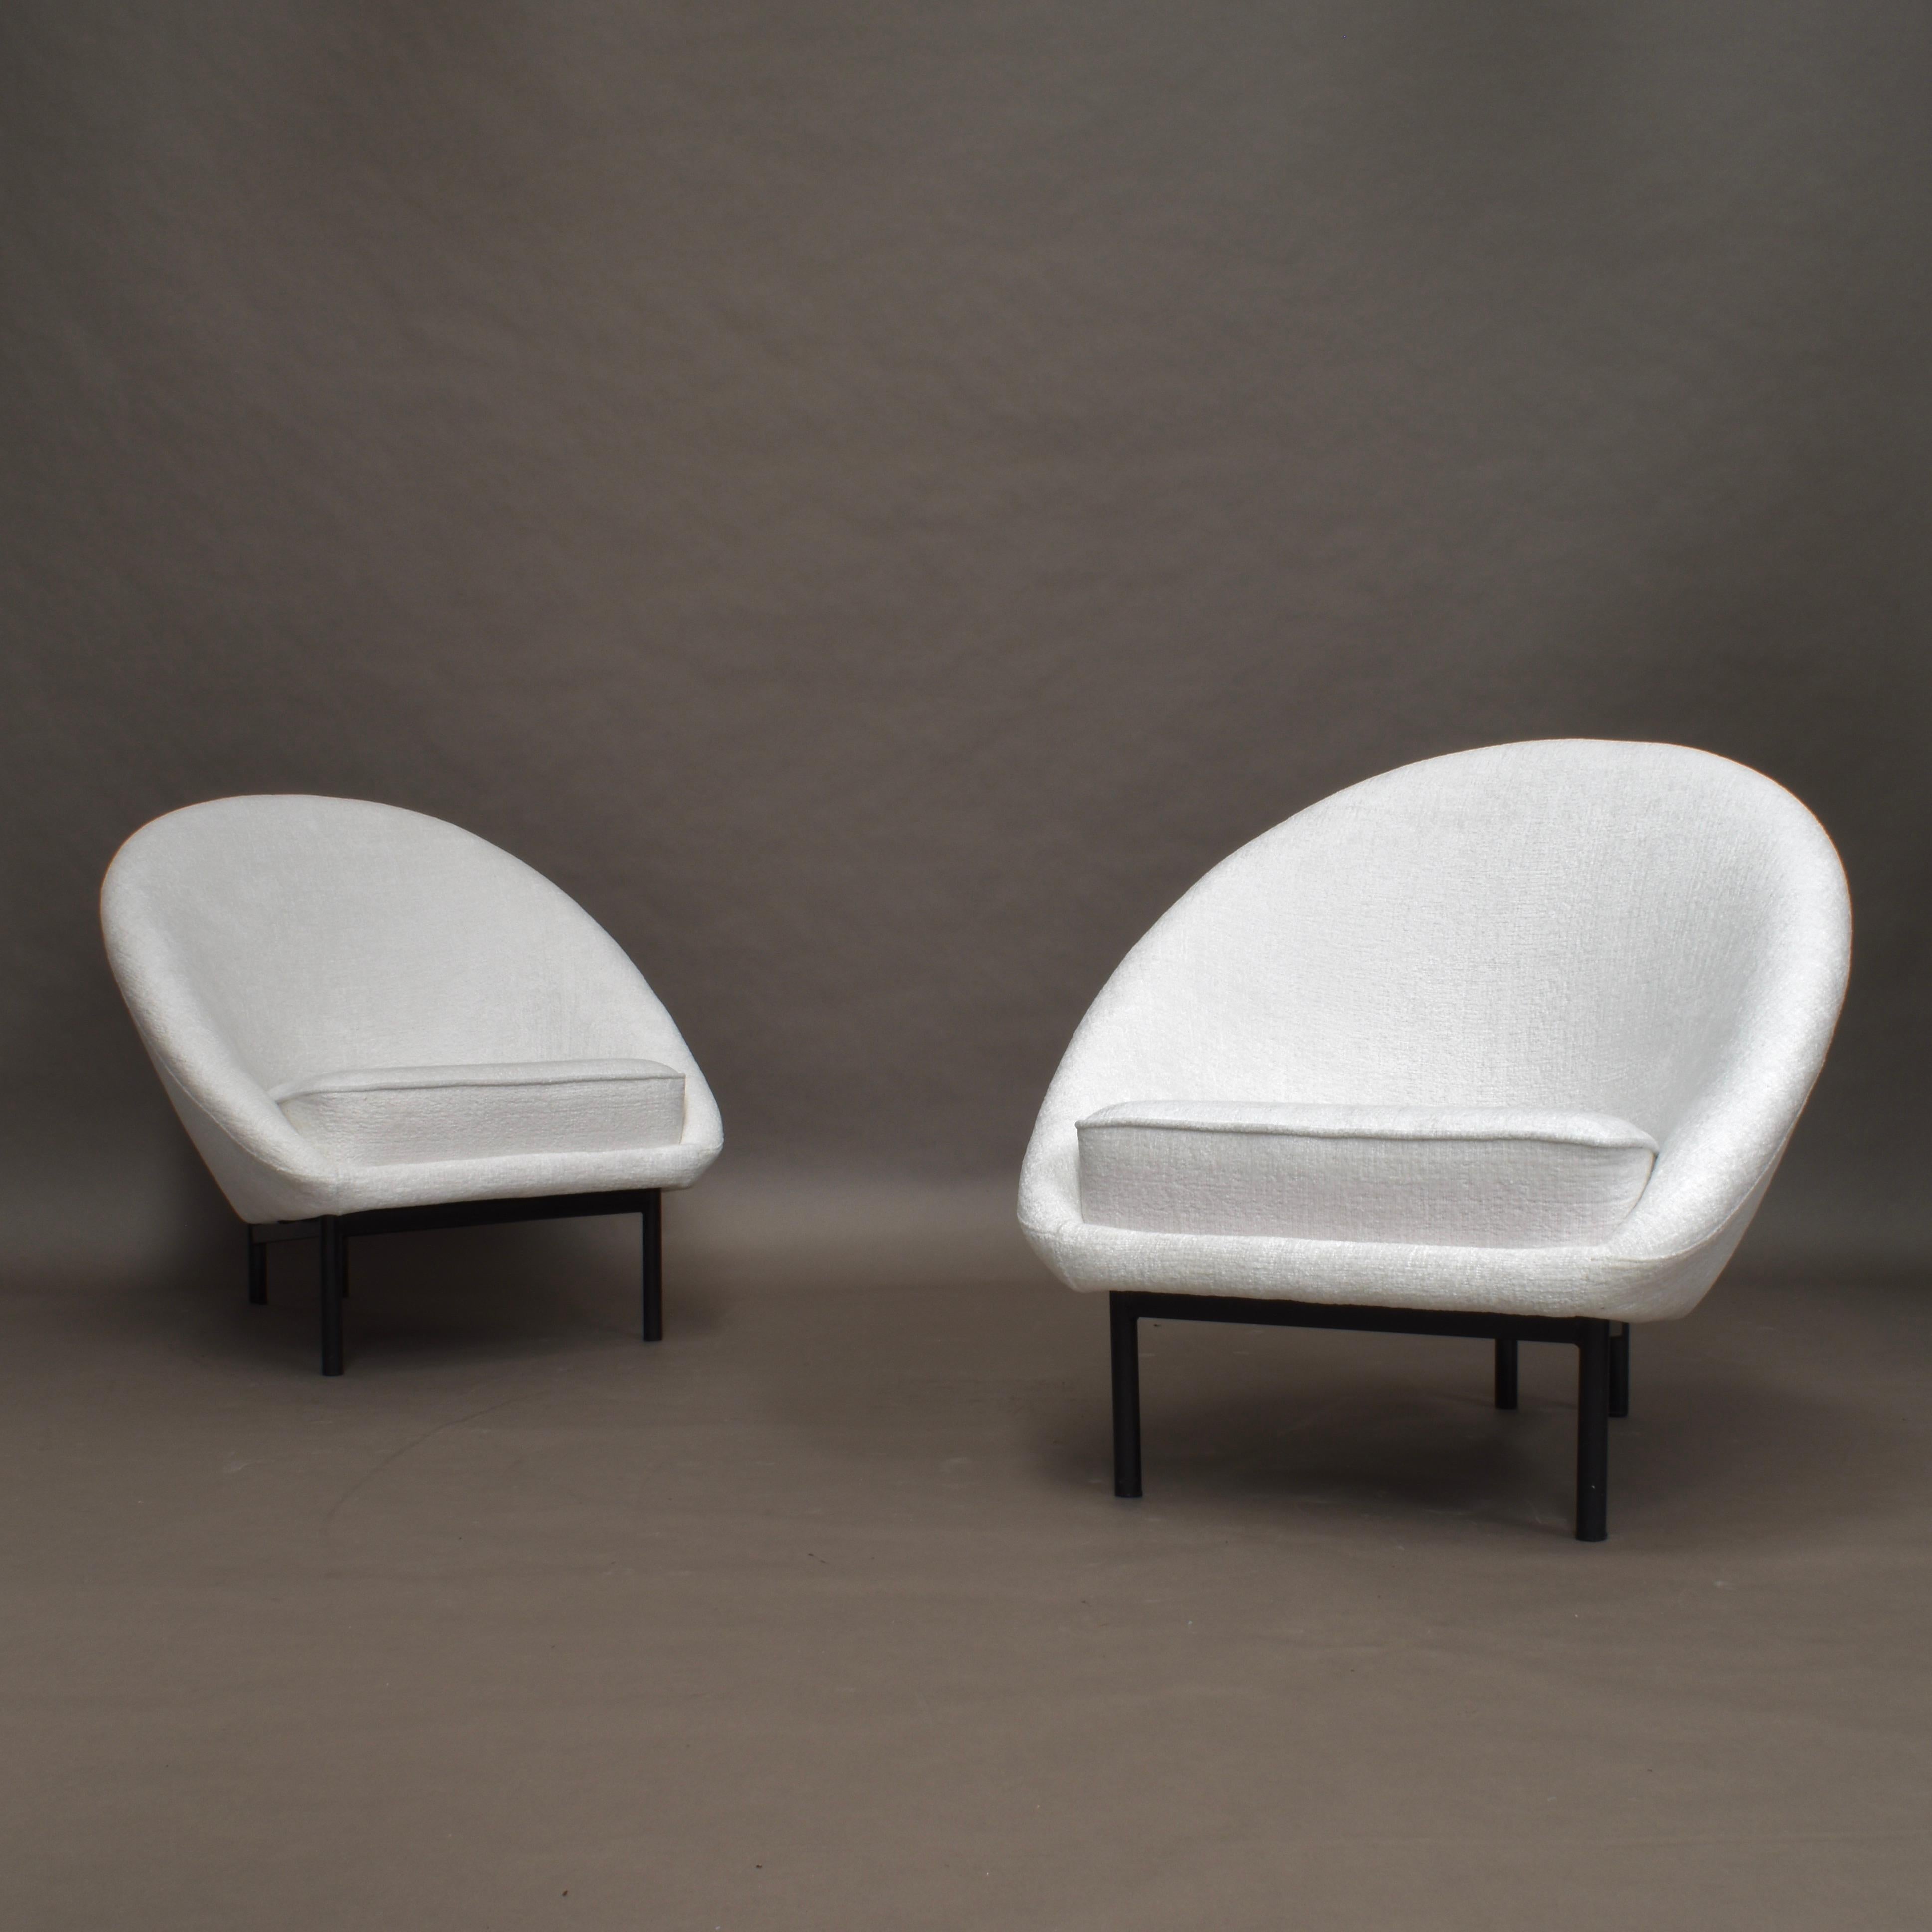 Pair of F815 armchairs by Theo Ruth for Artifort, Netherlands, 1958.
These are very rare, amazing and sophisticated center-pieces.

The chairs are reupholstered in a high quality white fabric with new foam interior and new support straps. The